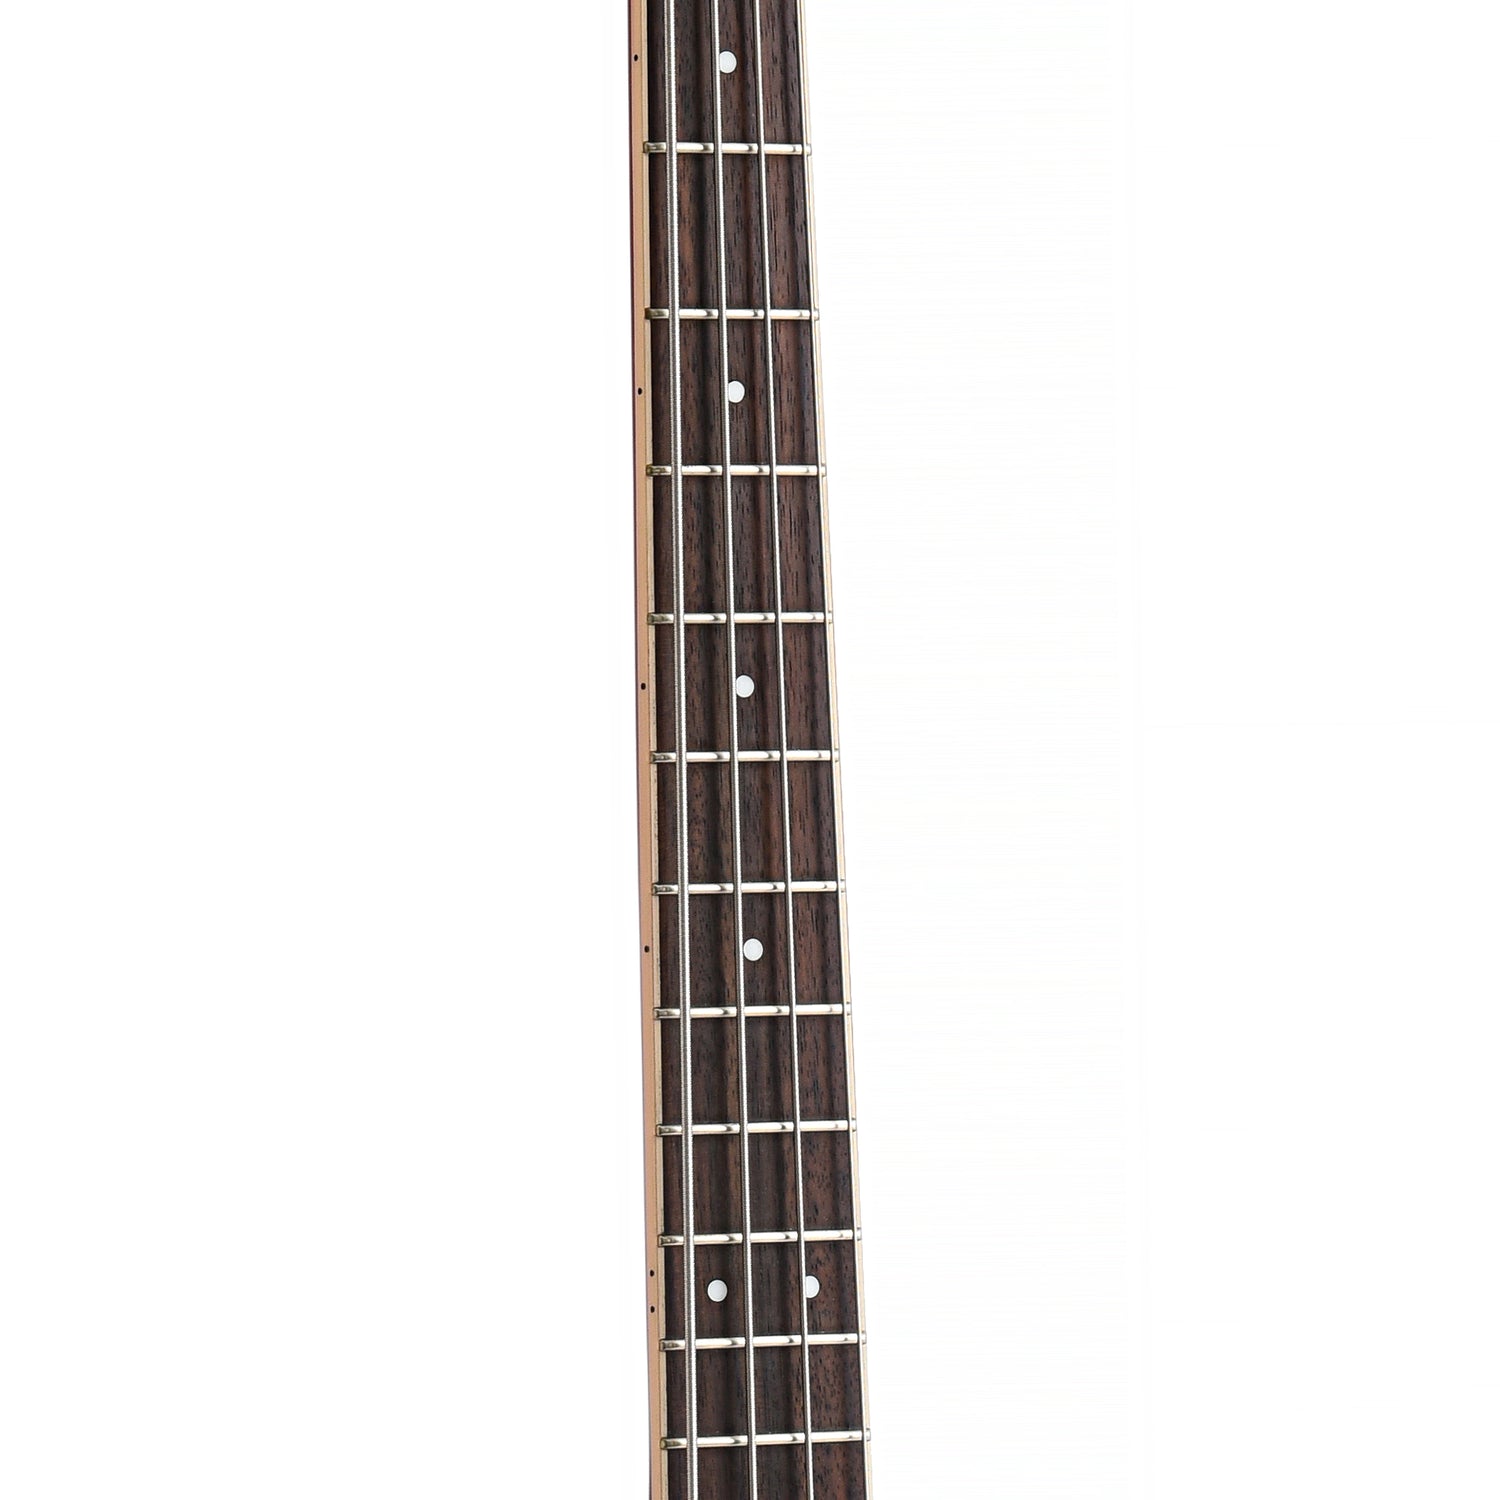 Image 5 of Guild Starfire 1 Bass, Cherry Red - SKU# GSF1BASS-CHR : Product Type Hollow Body Bass Guitars : Elderly Instruments